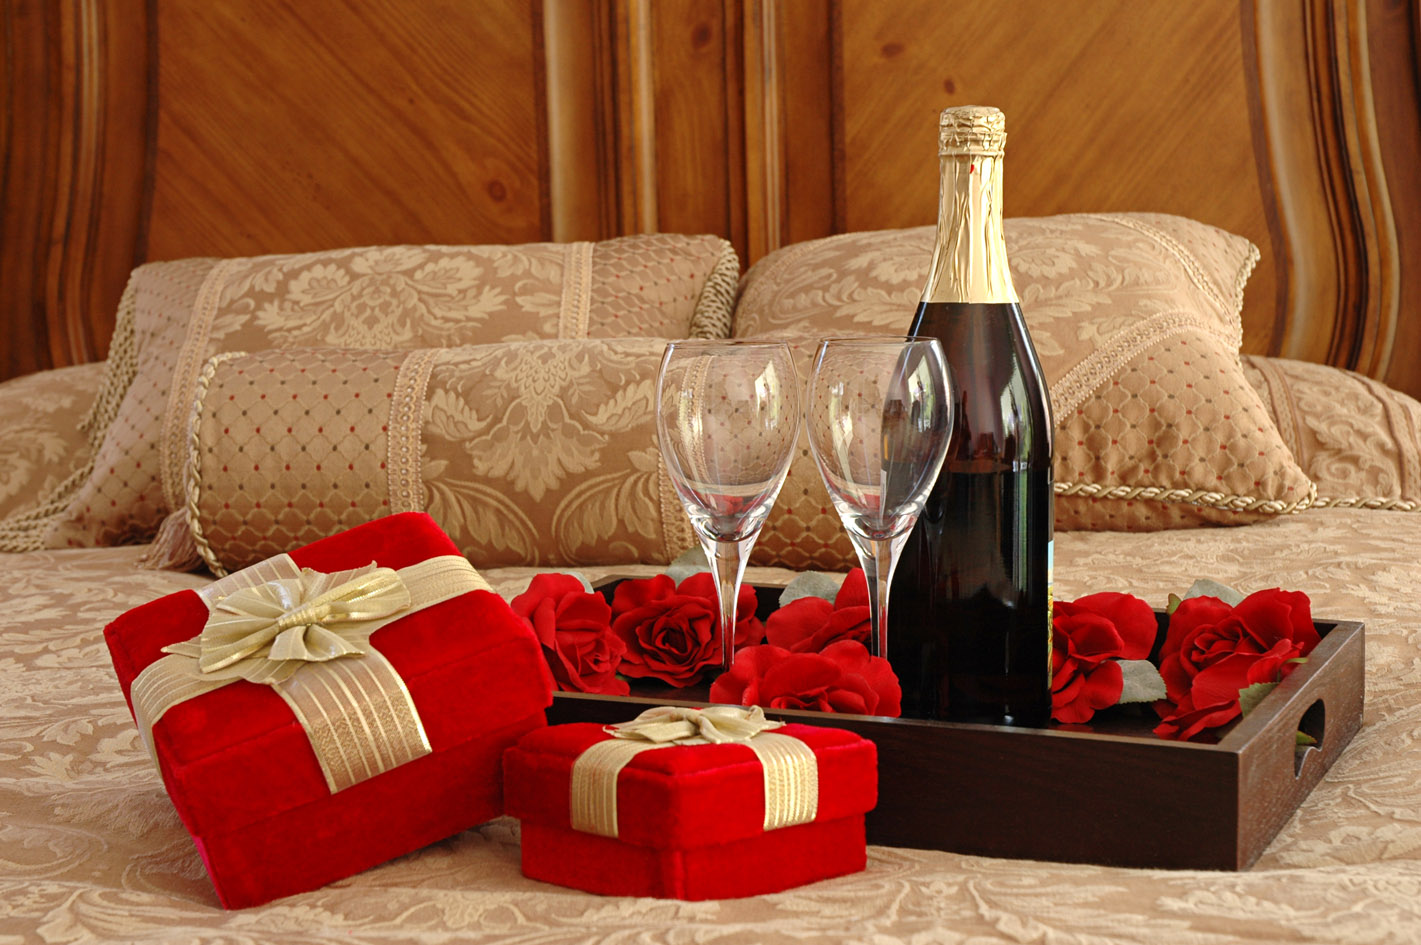 5 Romantic Gift Ideas For Your Lovely Husband